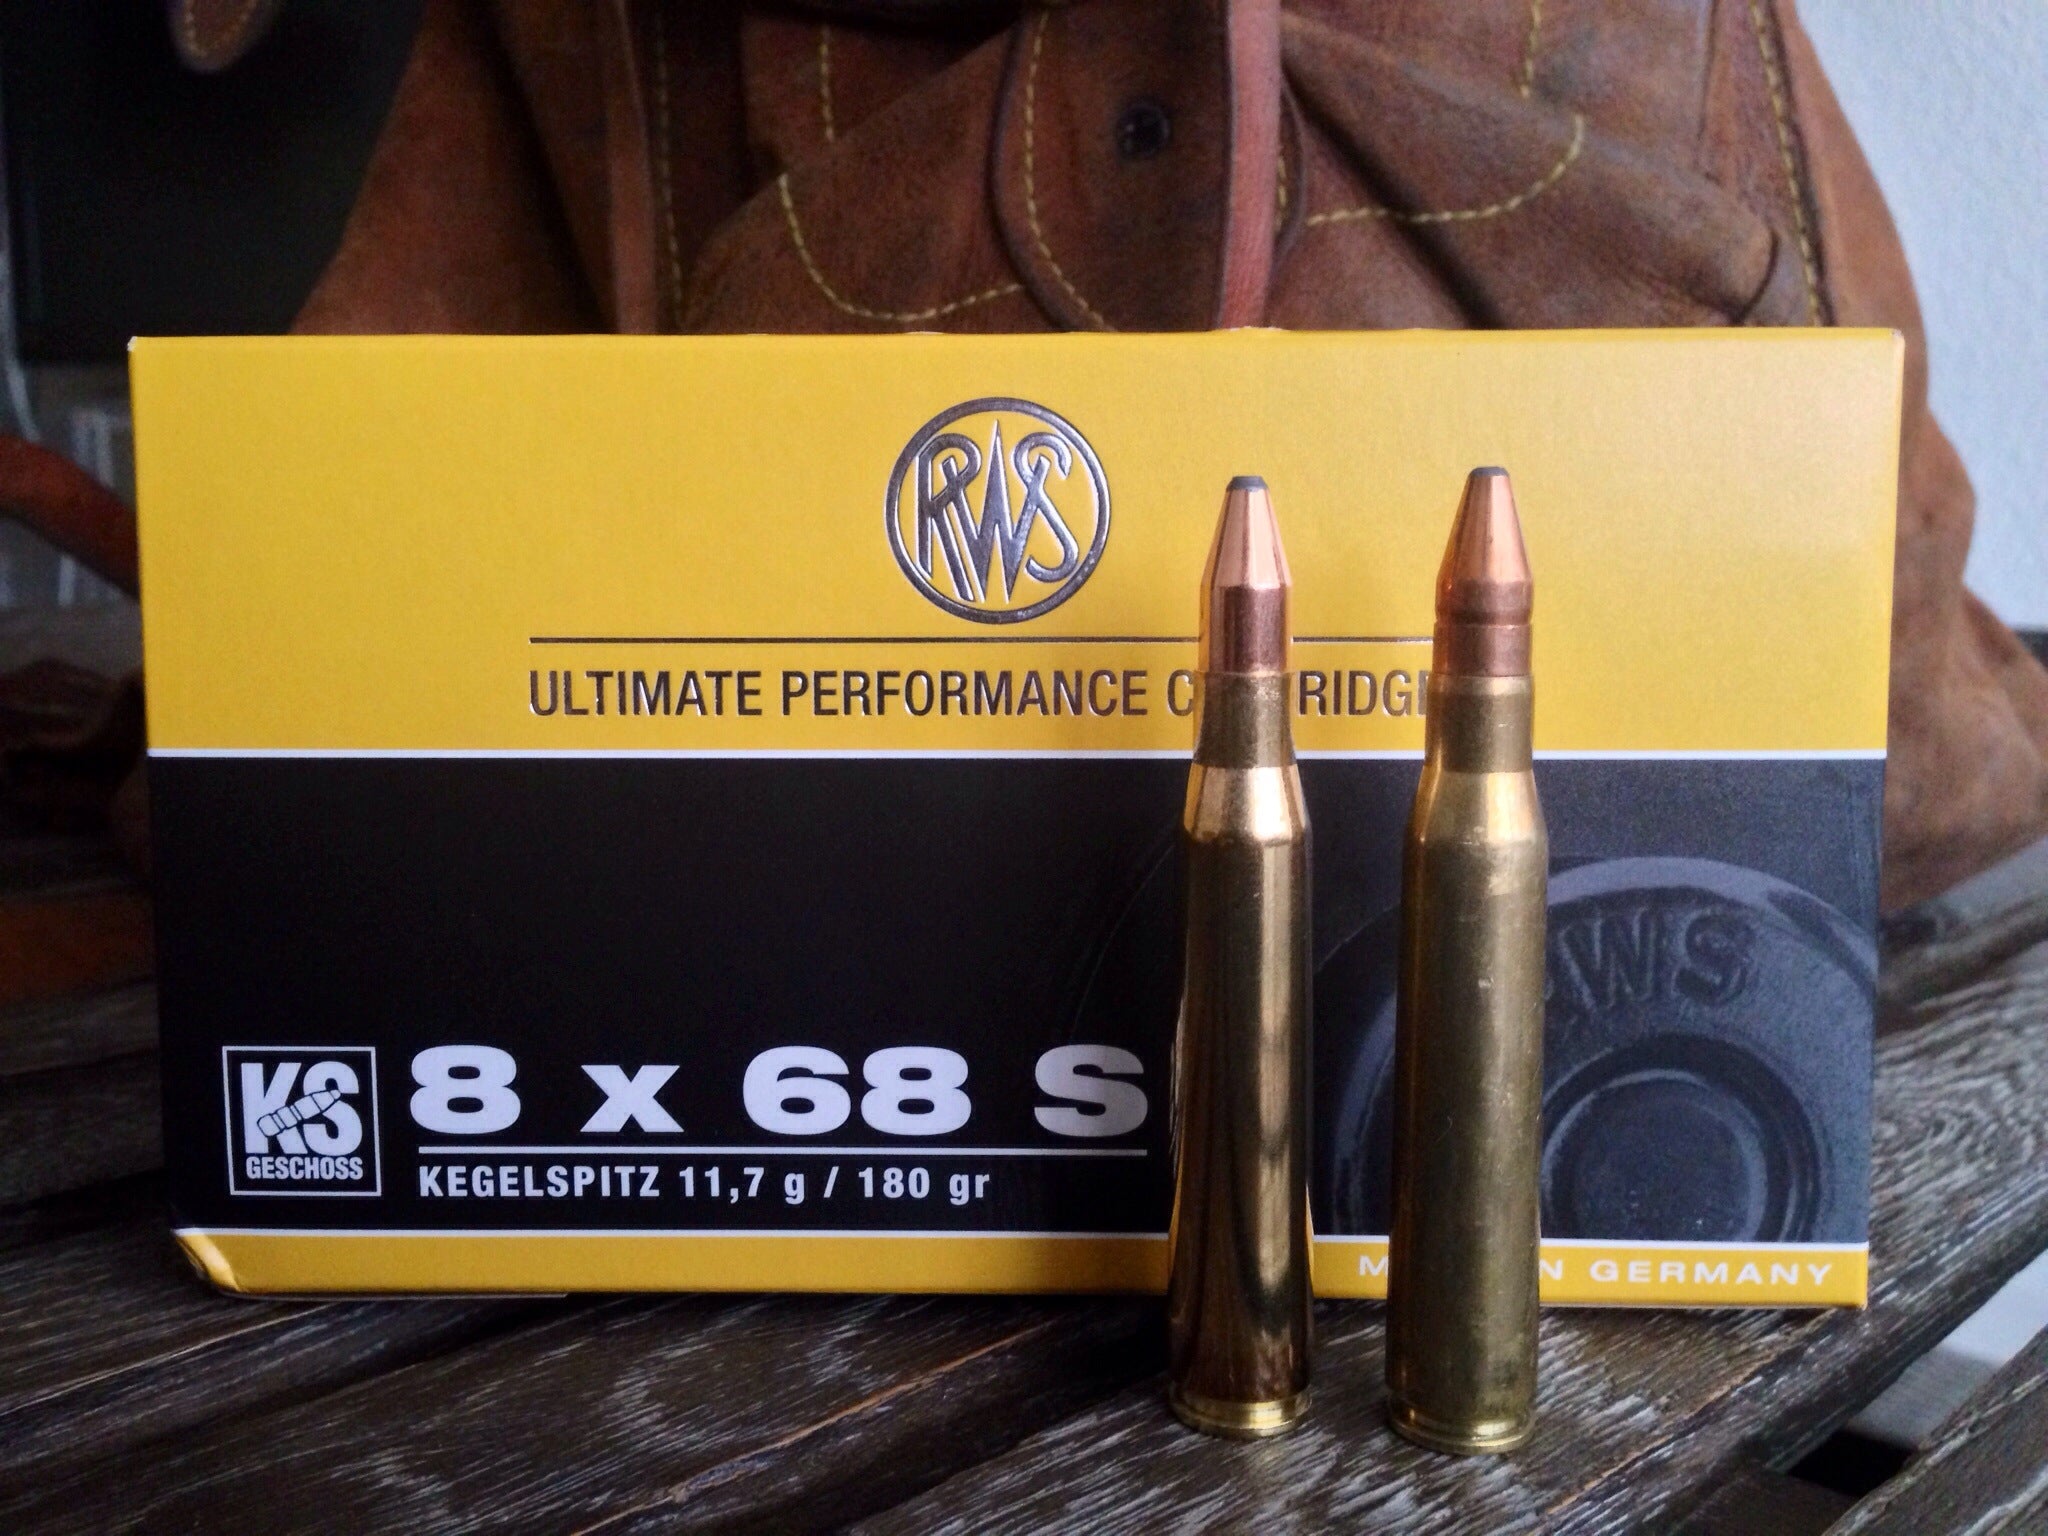  8x68 S Review: Pros and cons of the 8x68 S